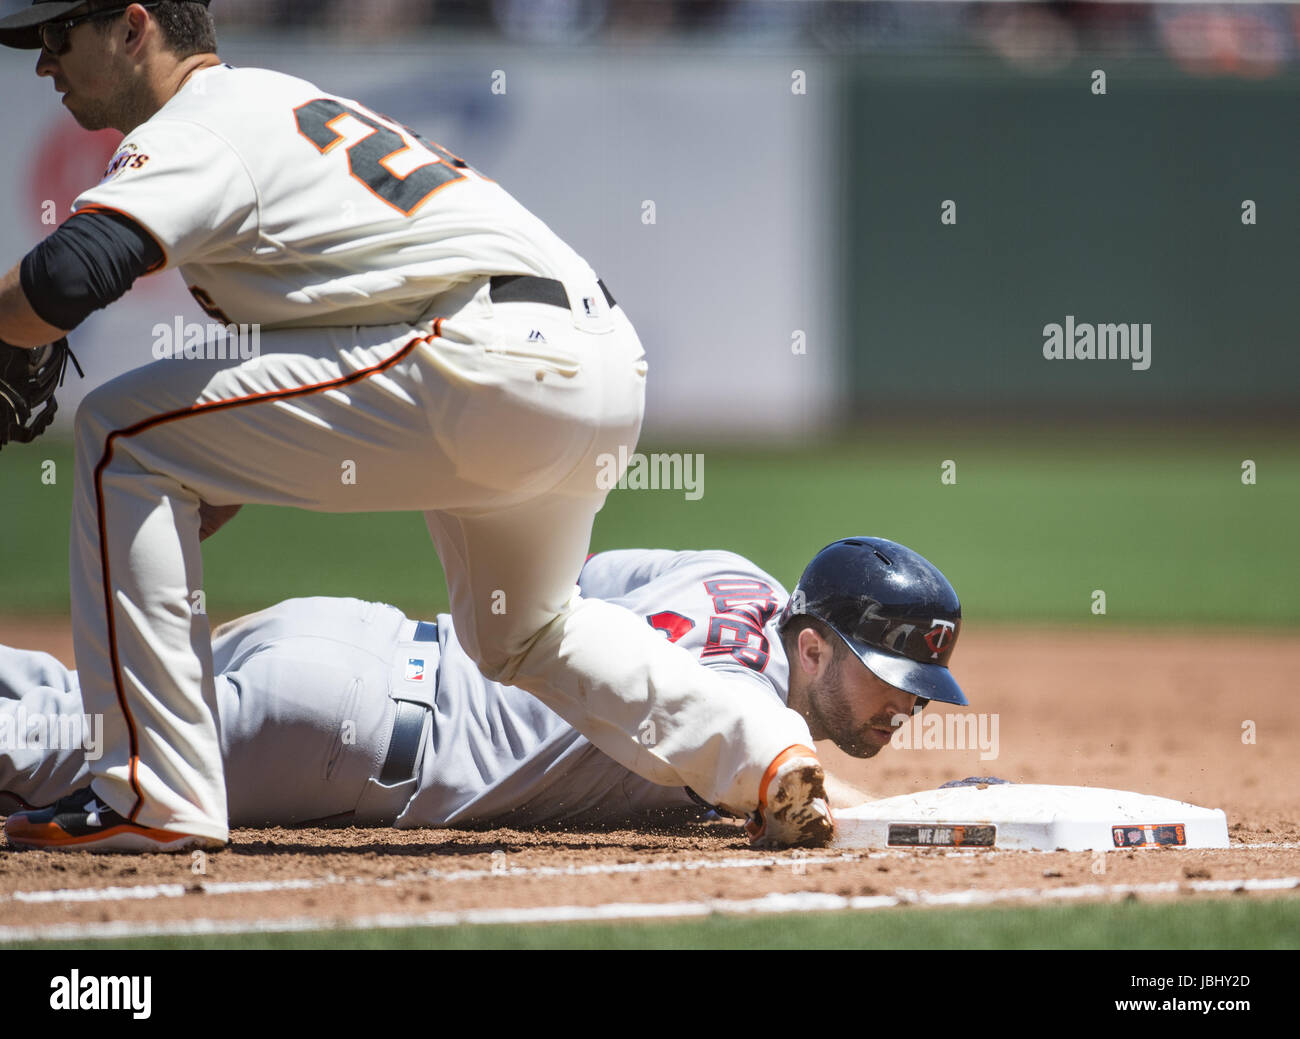 San Francisco, California, USA. 11th June, 2017. Minnesota Twins second baseman Brian Dozier (2) slides back into first base, during a MLB baseball game between the Minnesota Twins and the San Francisco Giants on ''Dog Days of Summer'' at AT&T Park in San Francisco, California. Valerie Shoaps/CSM/Alamy Live News Stock Photo